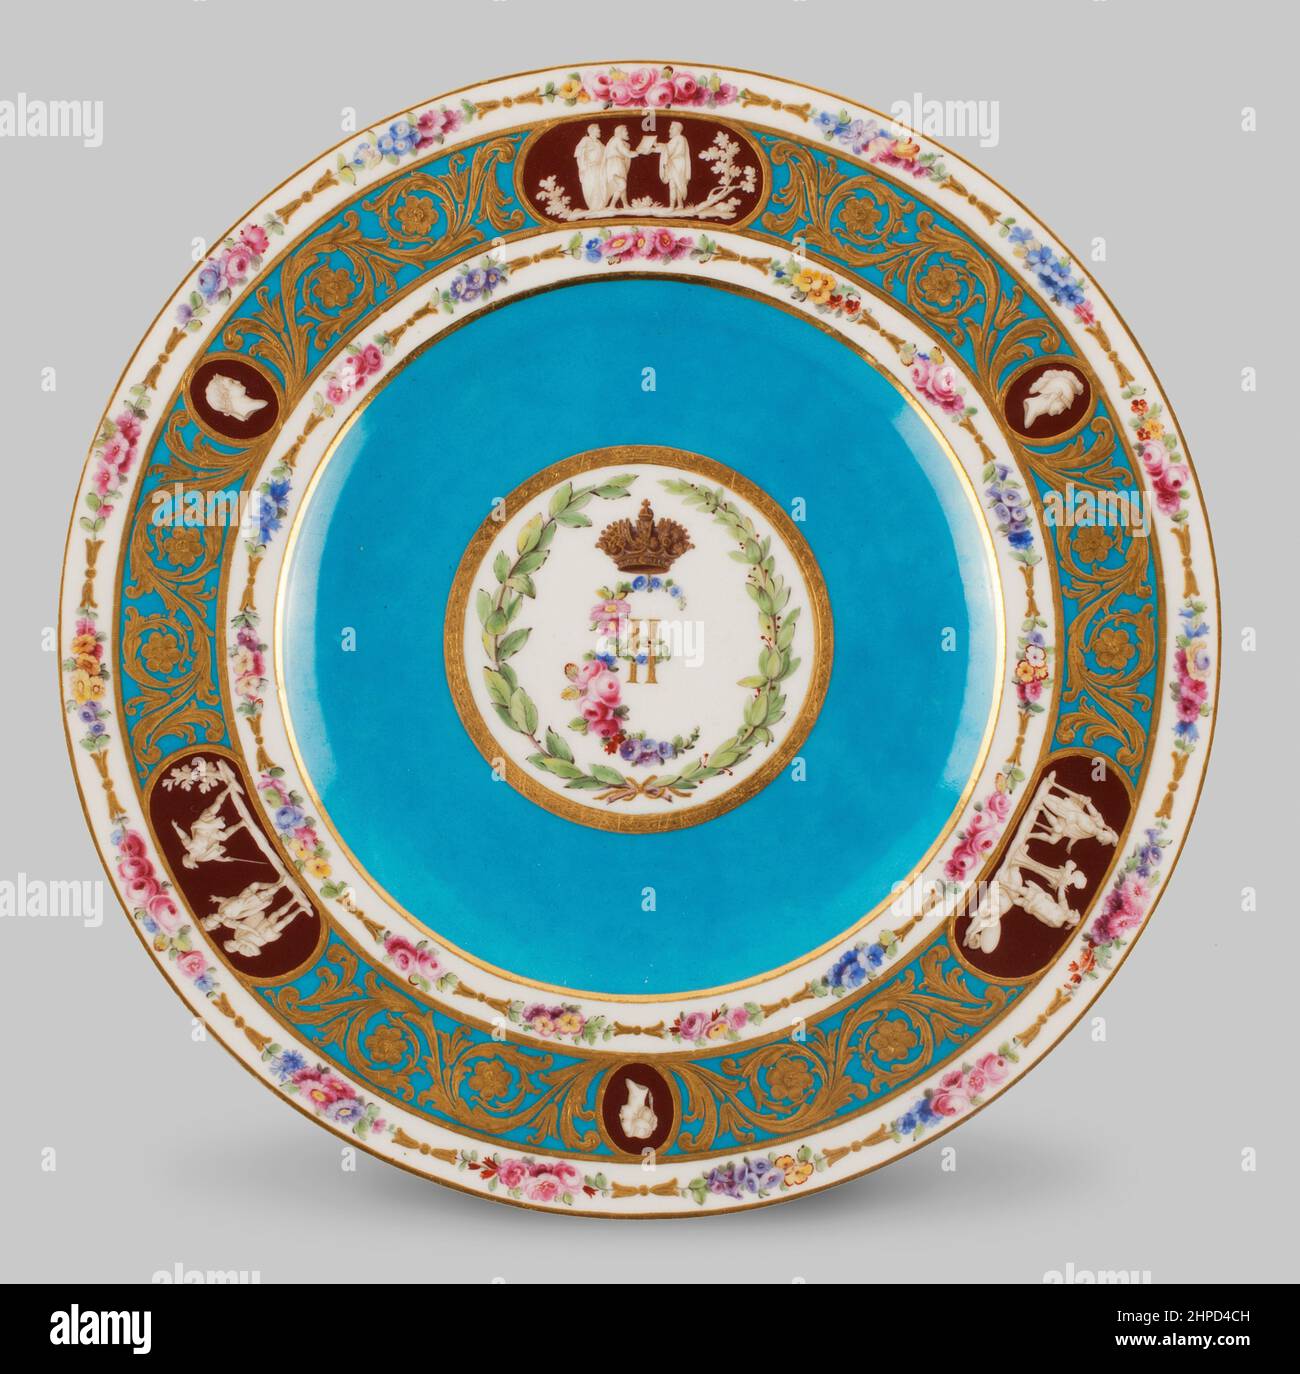 Gilded plate from Catherine the Great’s (1729–1796) dinner service made by Sèvres Porcelain Manufactory in 1778. Stock Photo